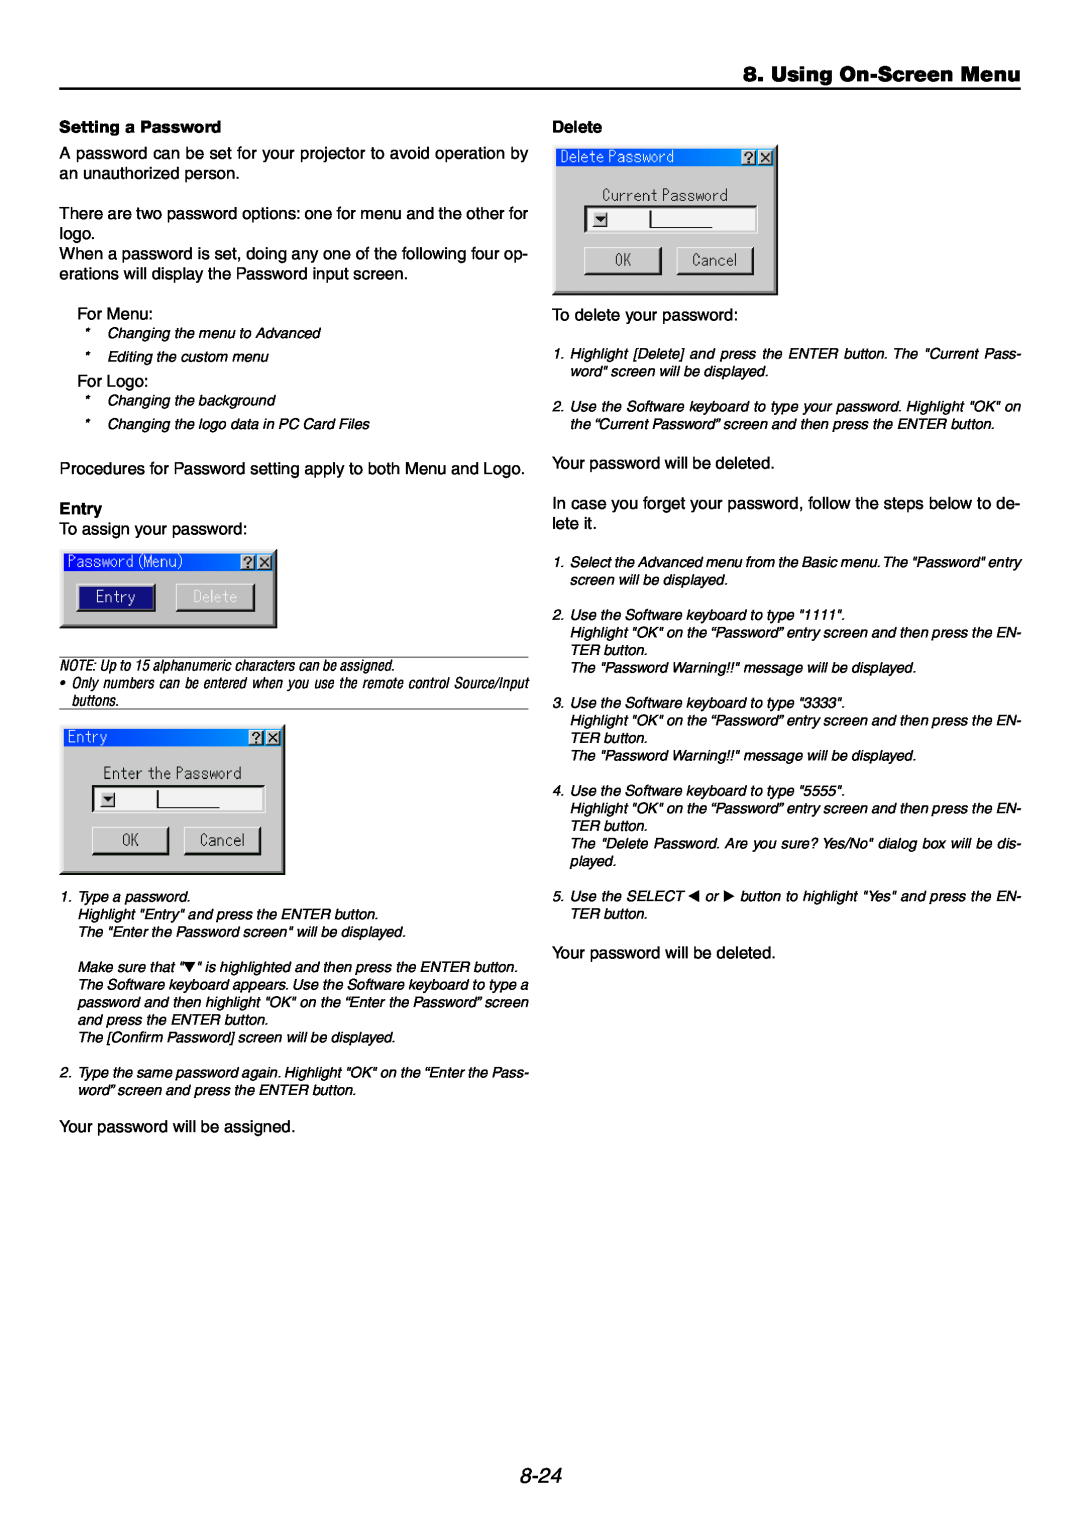 NEC GT6000 user manual Using On-ScreenMenu, 8-24, Setting a Password, Delete, Entry 